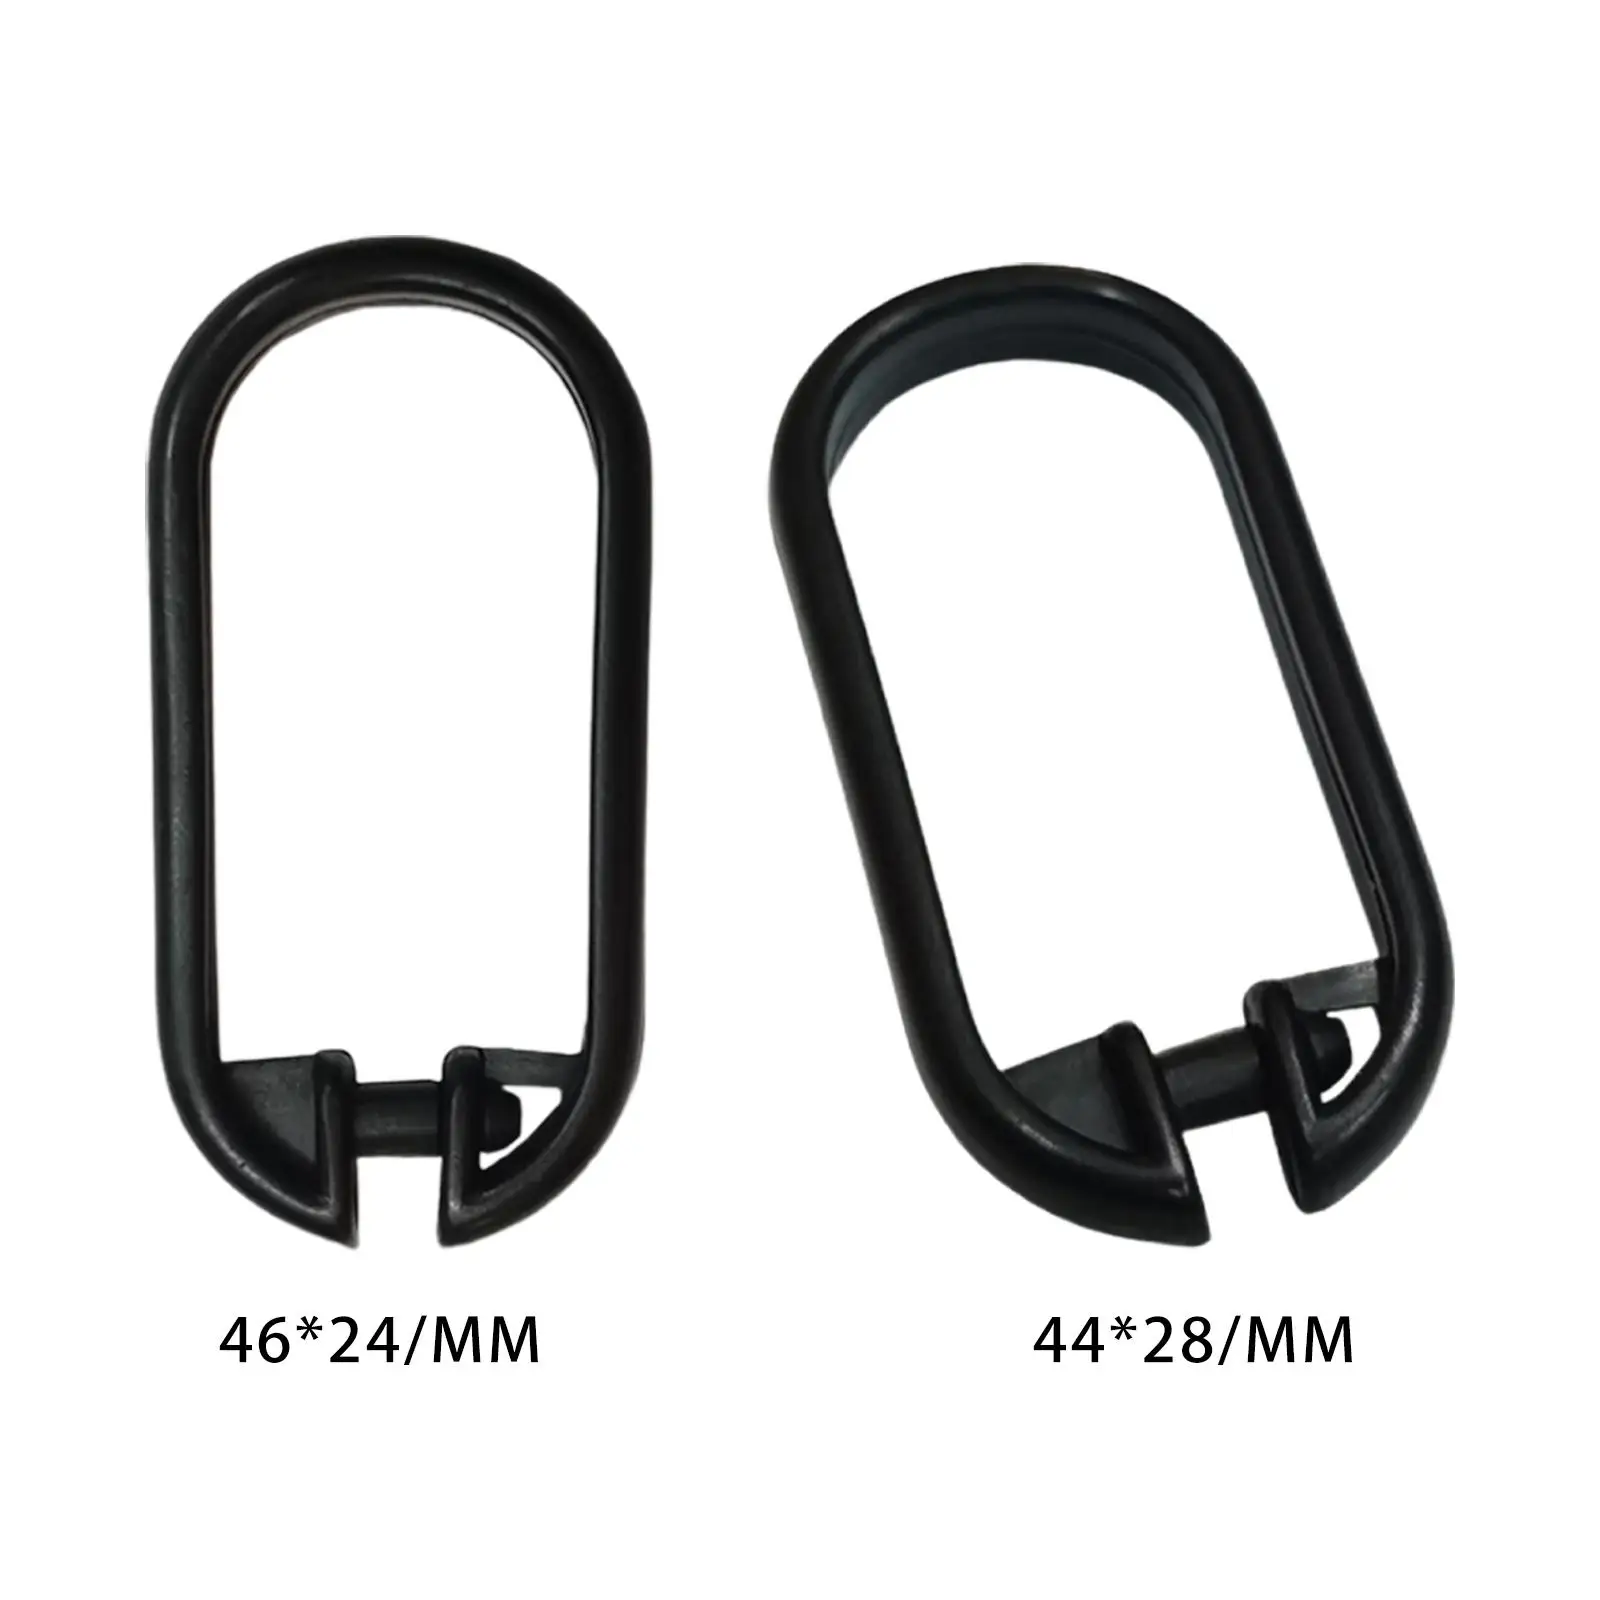 50x Portable Curtain Loop Buckle Direct Replaces Multifunctional Curtain Hanging Loop Buckle for Bathroom Home Shower Accessory